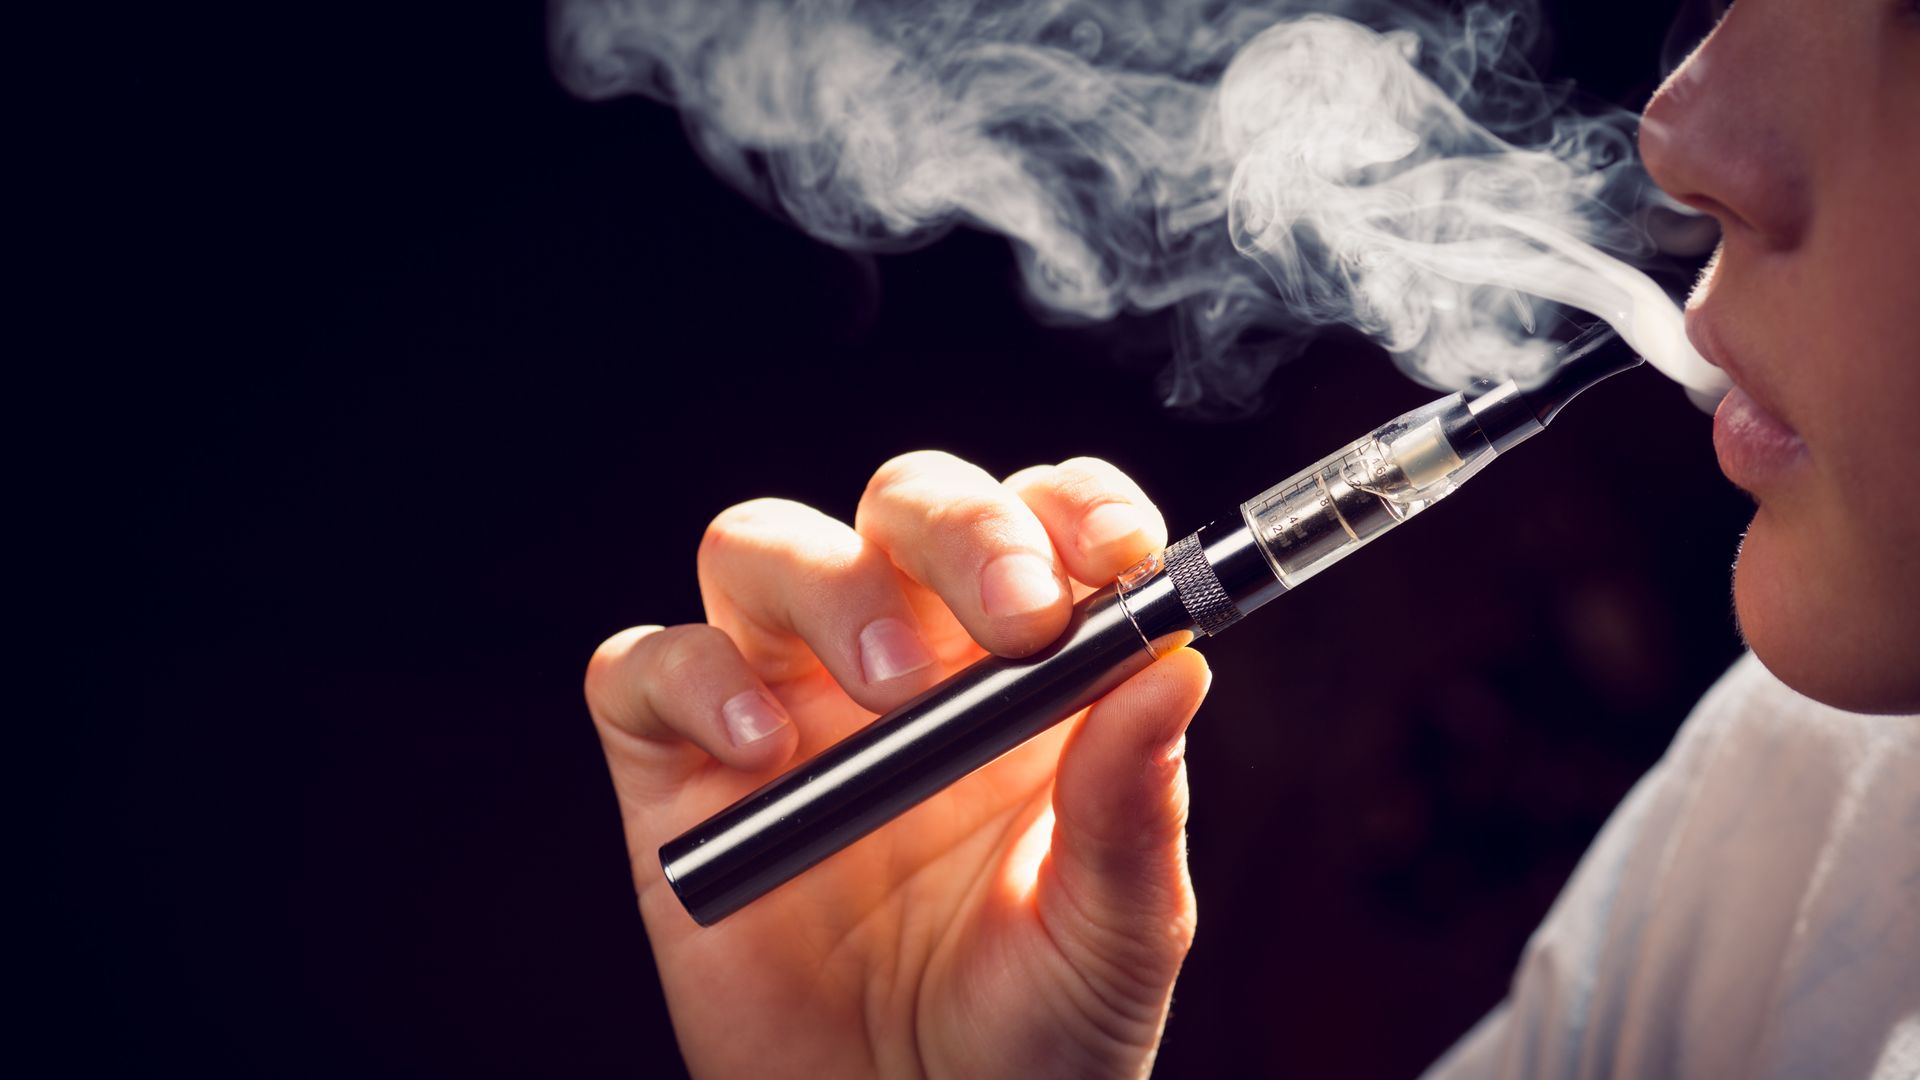 In this image, a young person holds an e-cigarette and vapes.